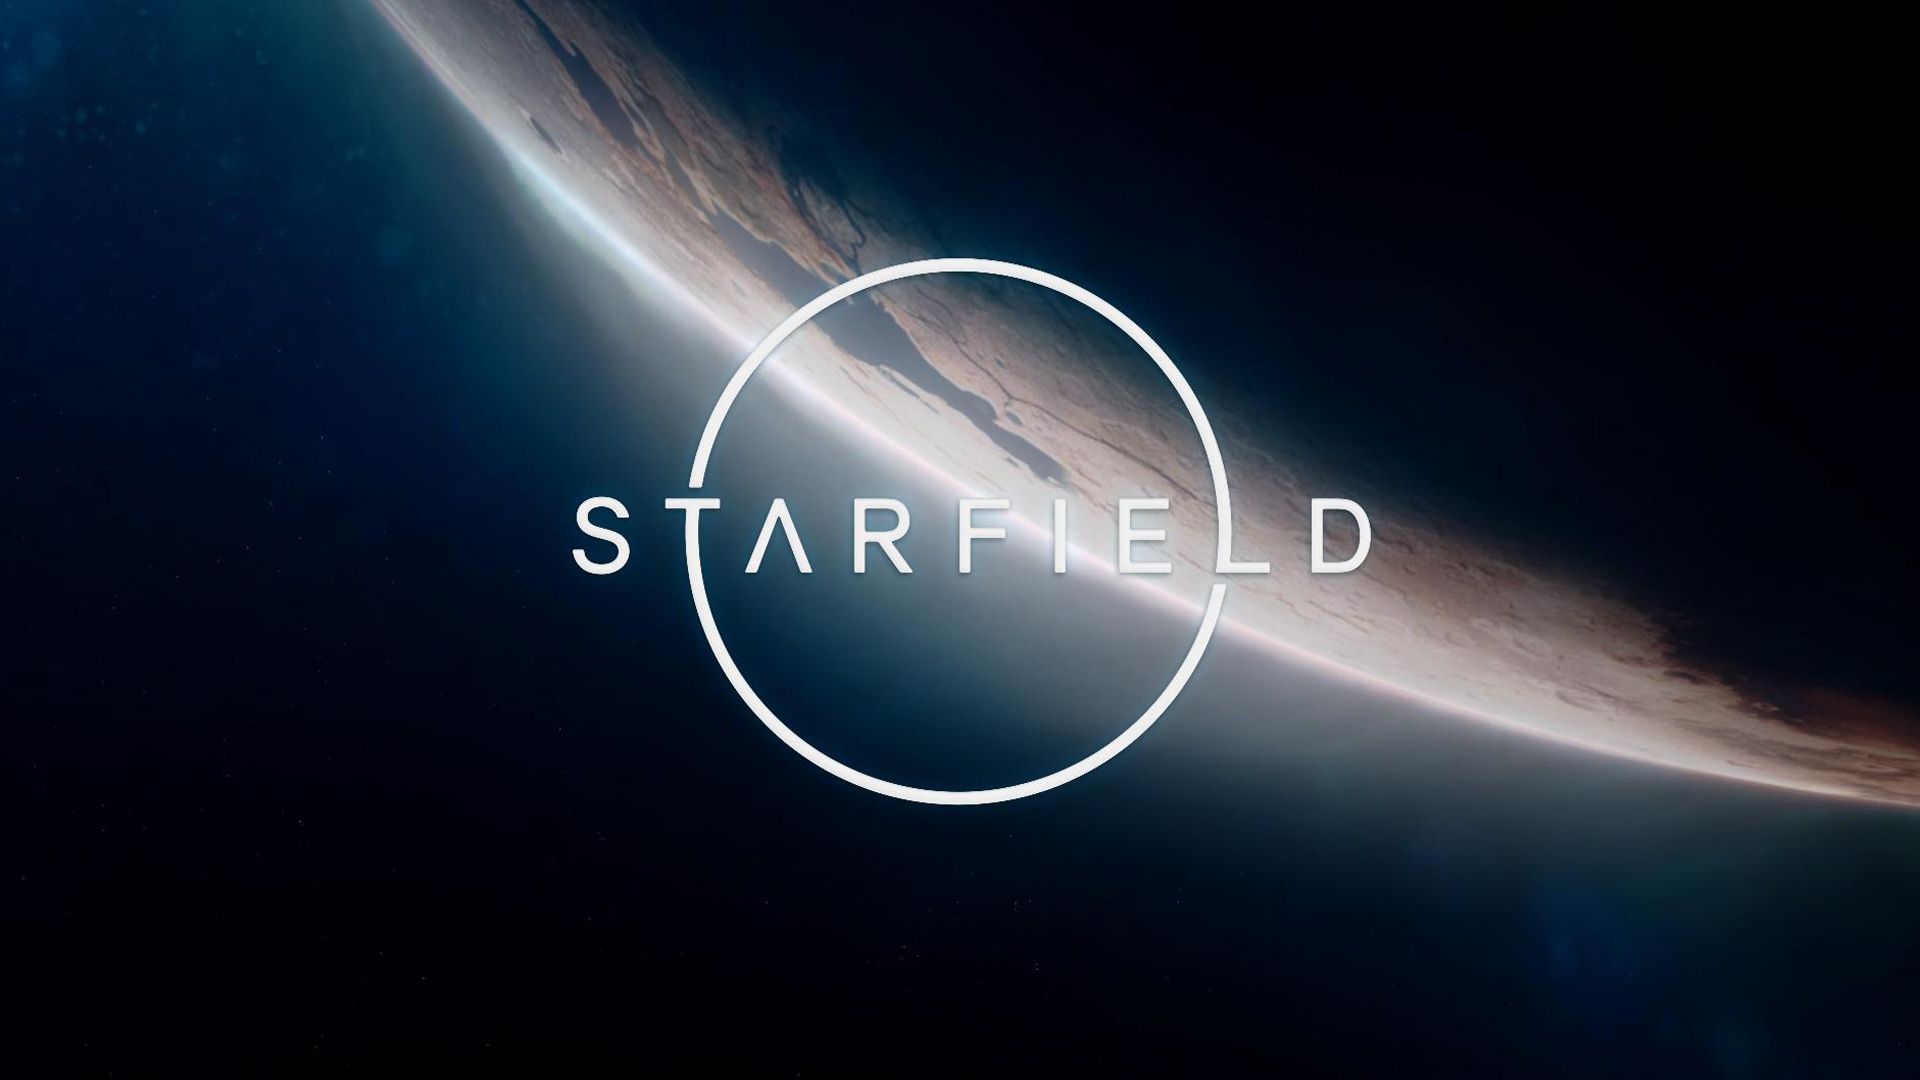 Starfield Image May Have Leaked